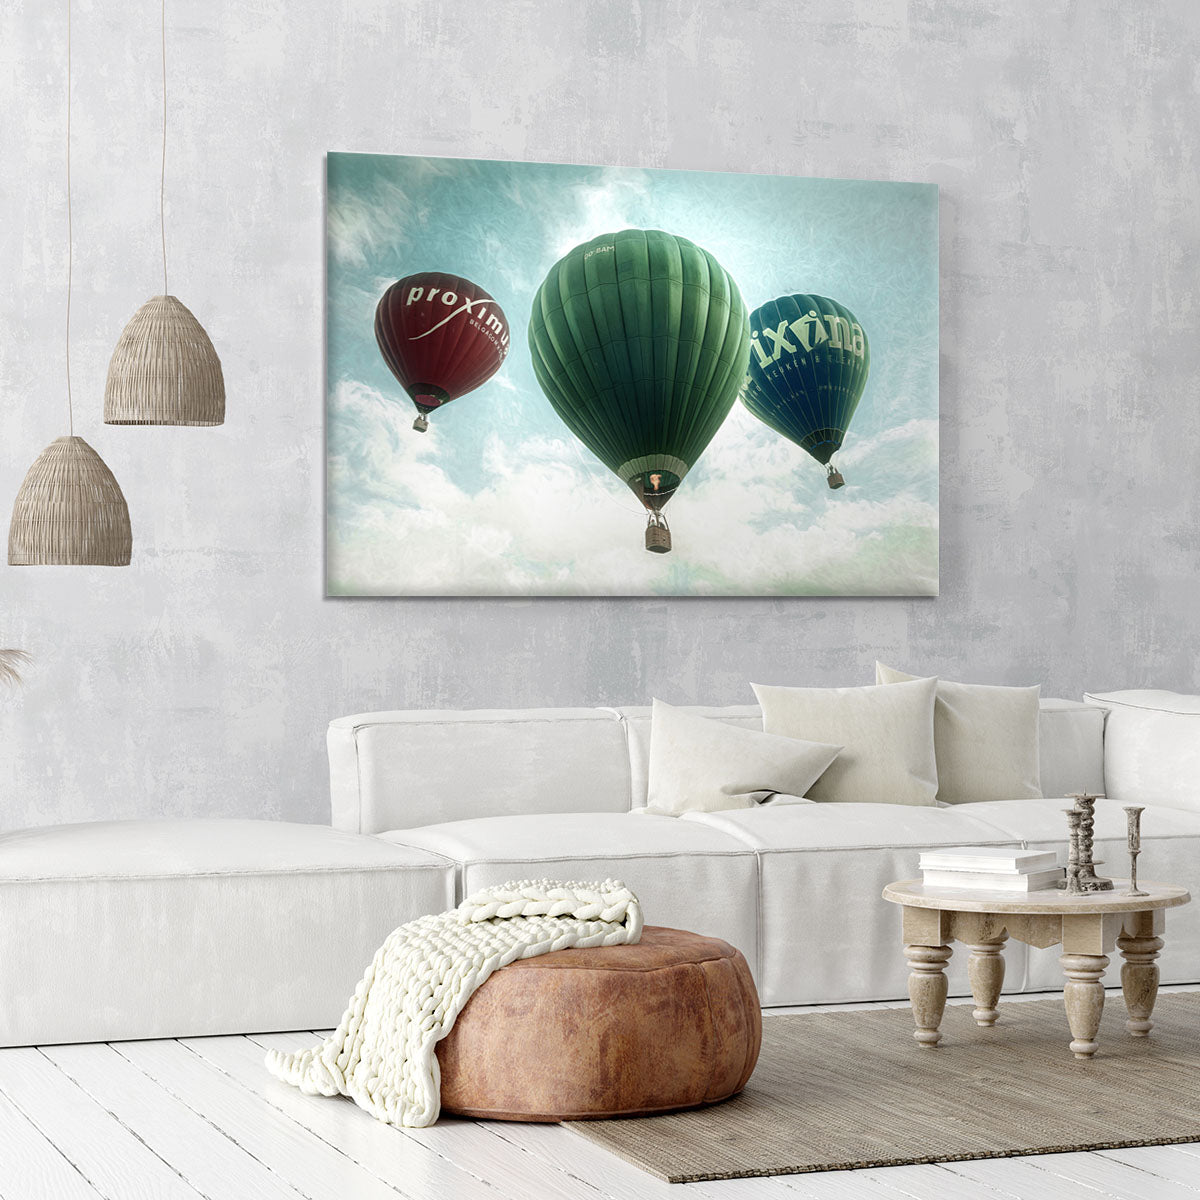 Full colour Canvas Print or Poster - 1x - 6